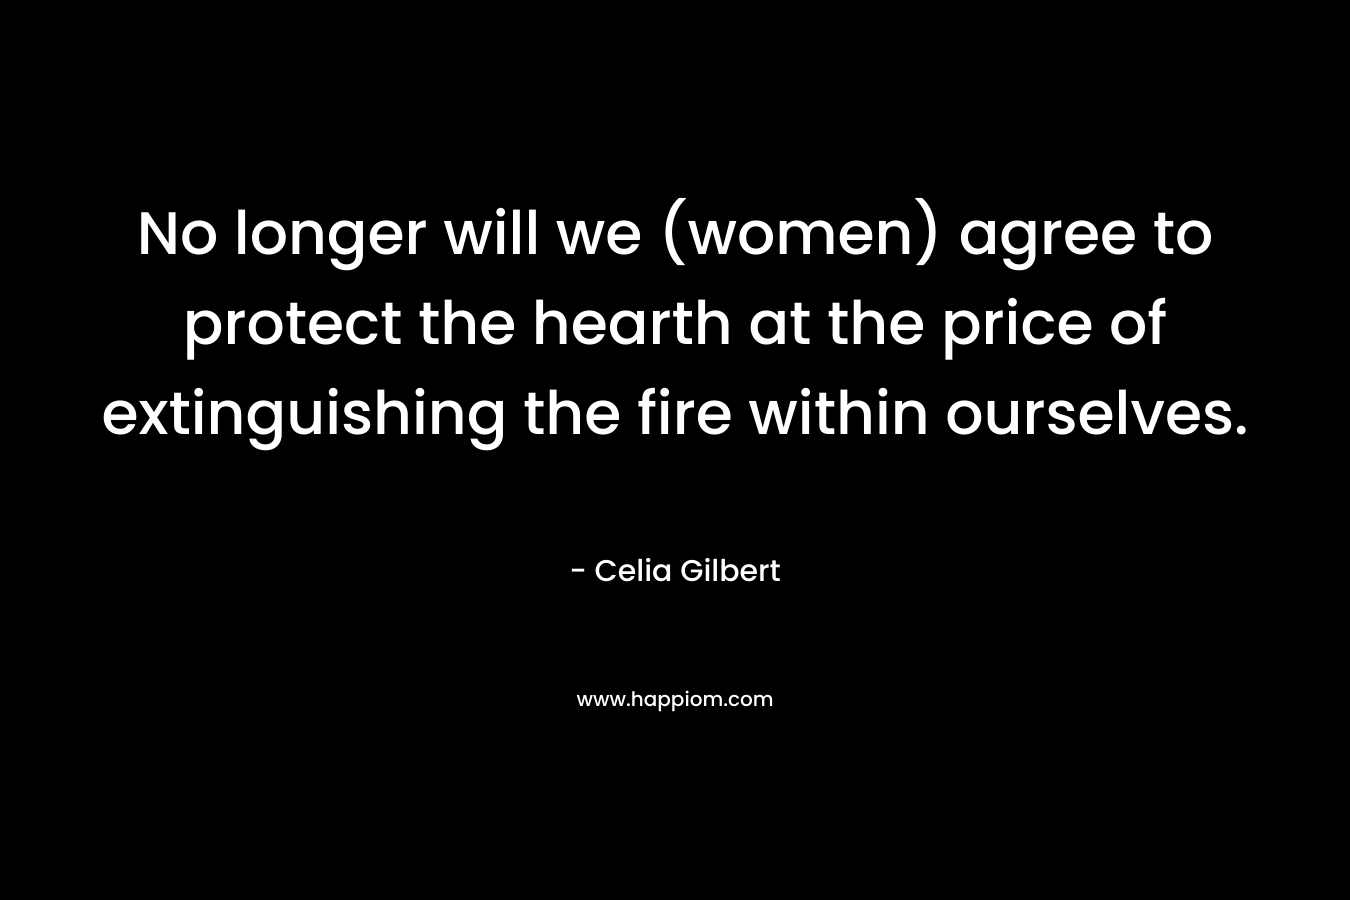 No longer will we (women) agree to protect the hearth at the price of extinguishing the fire within ourselves. – Celia Gilbert